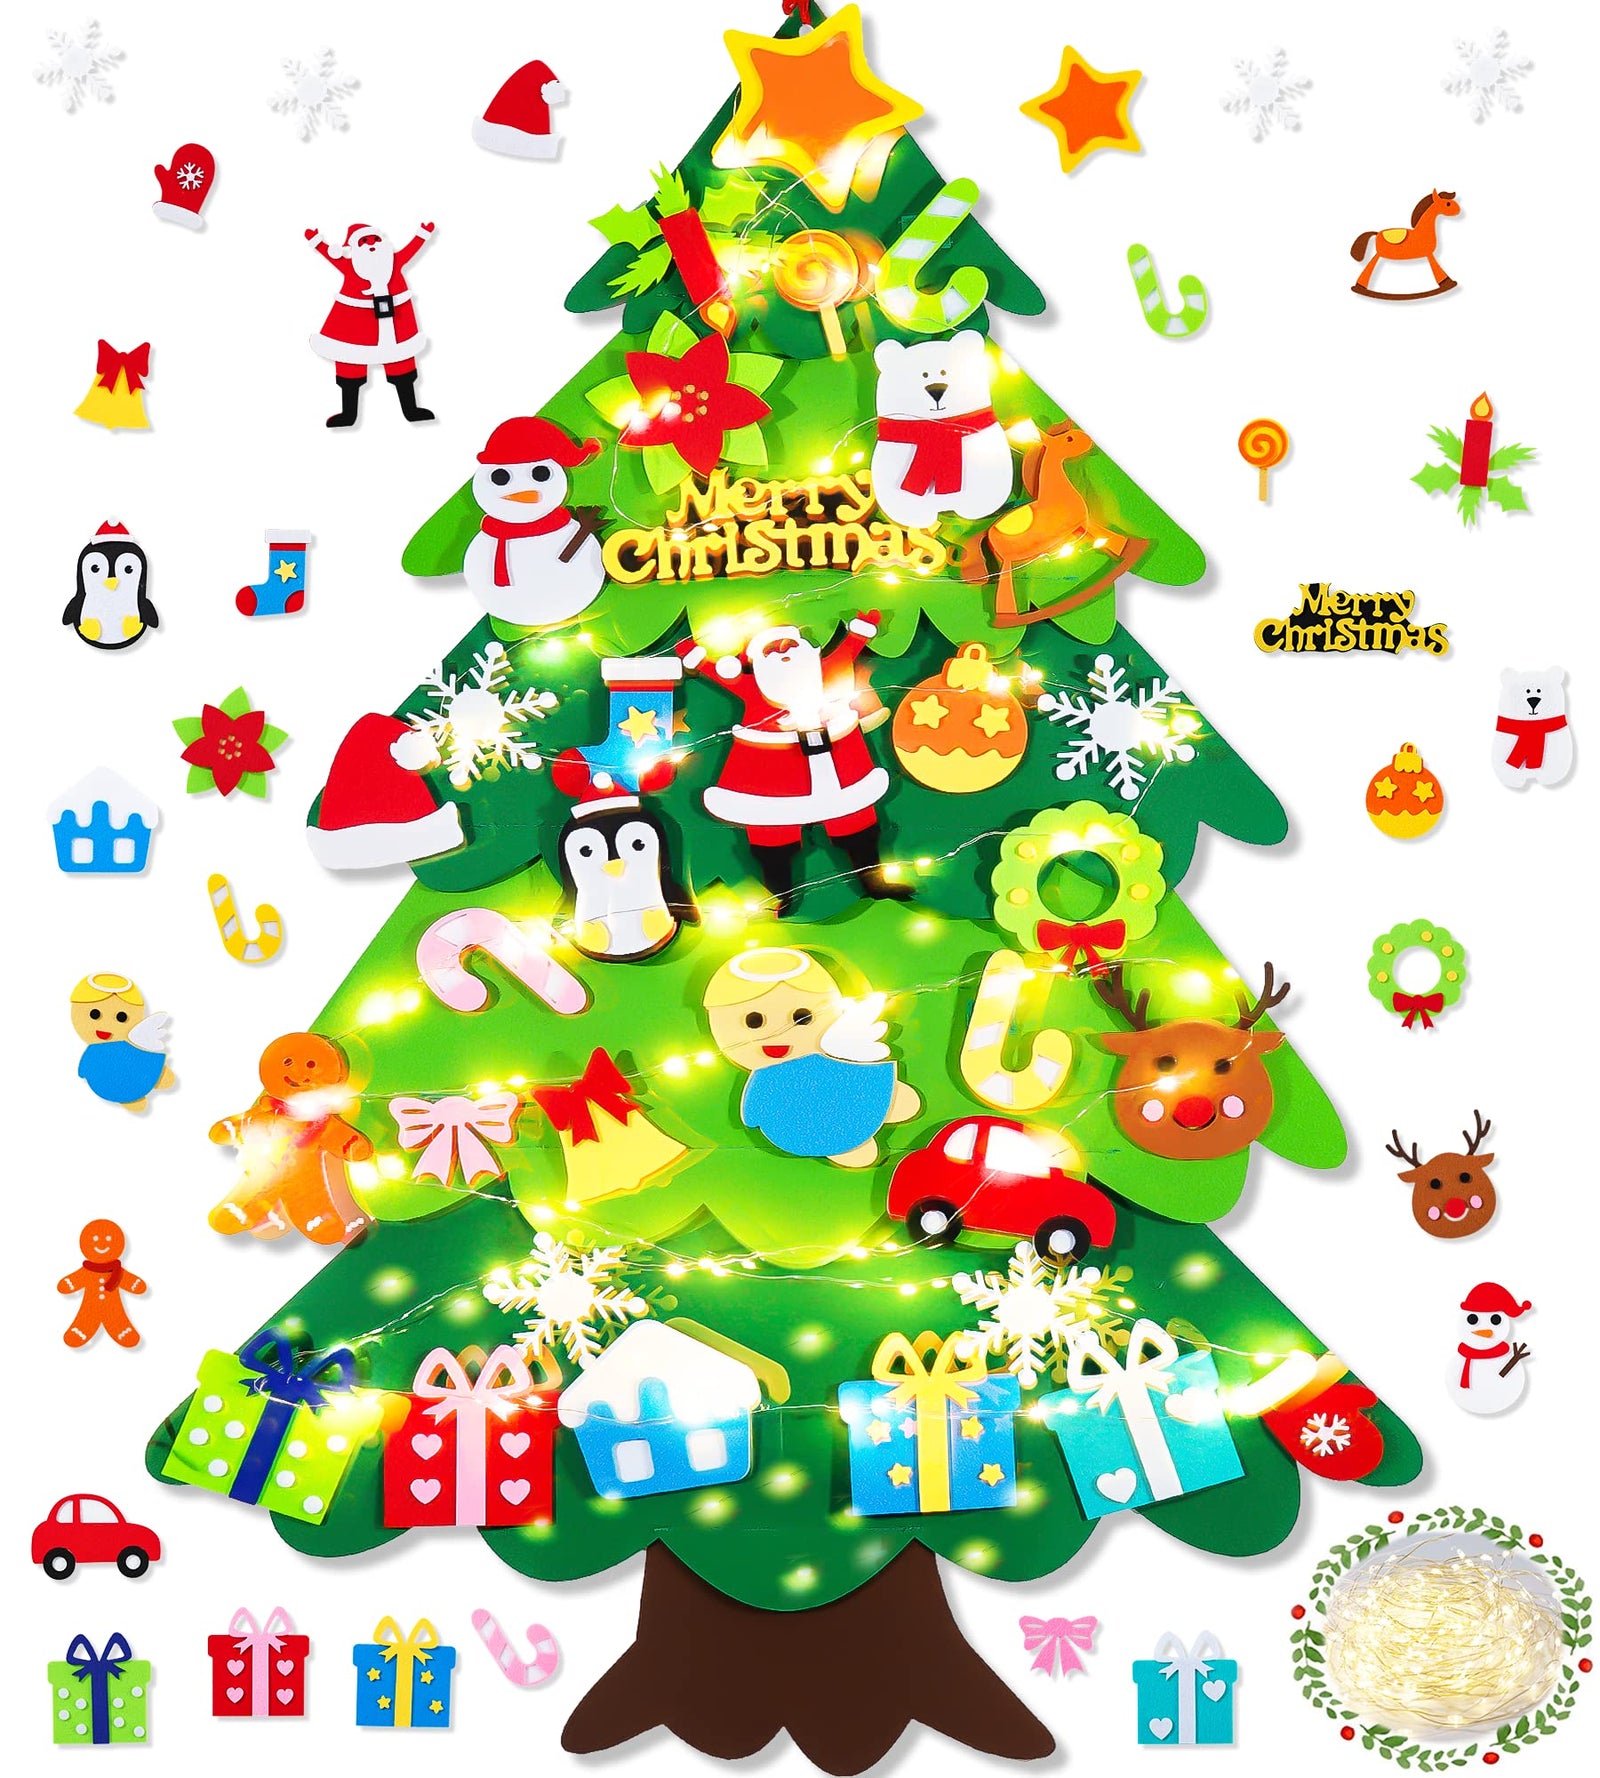 RVZHI Felt Christmas Tree for Kids Wall with Lights 33pcs Ornaments DIY Felt Christmas Tree for Toddlers with Exquisite Poster, Kids Gift Felt Wall Xmas Tree Kit Set for Toddlers Home Door Decoration